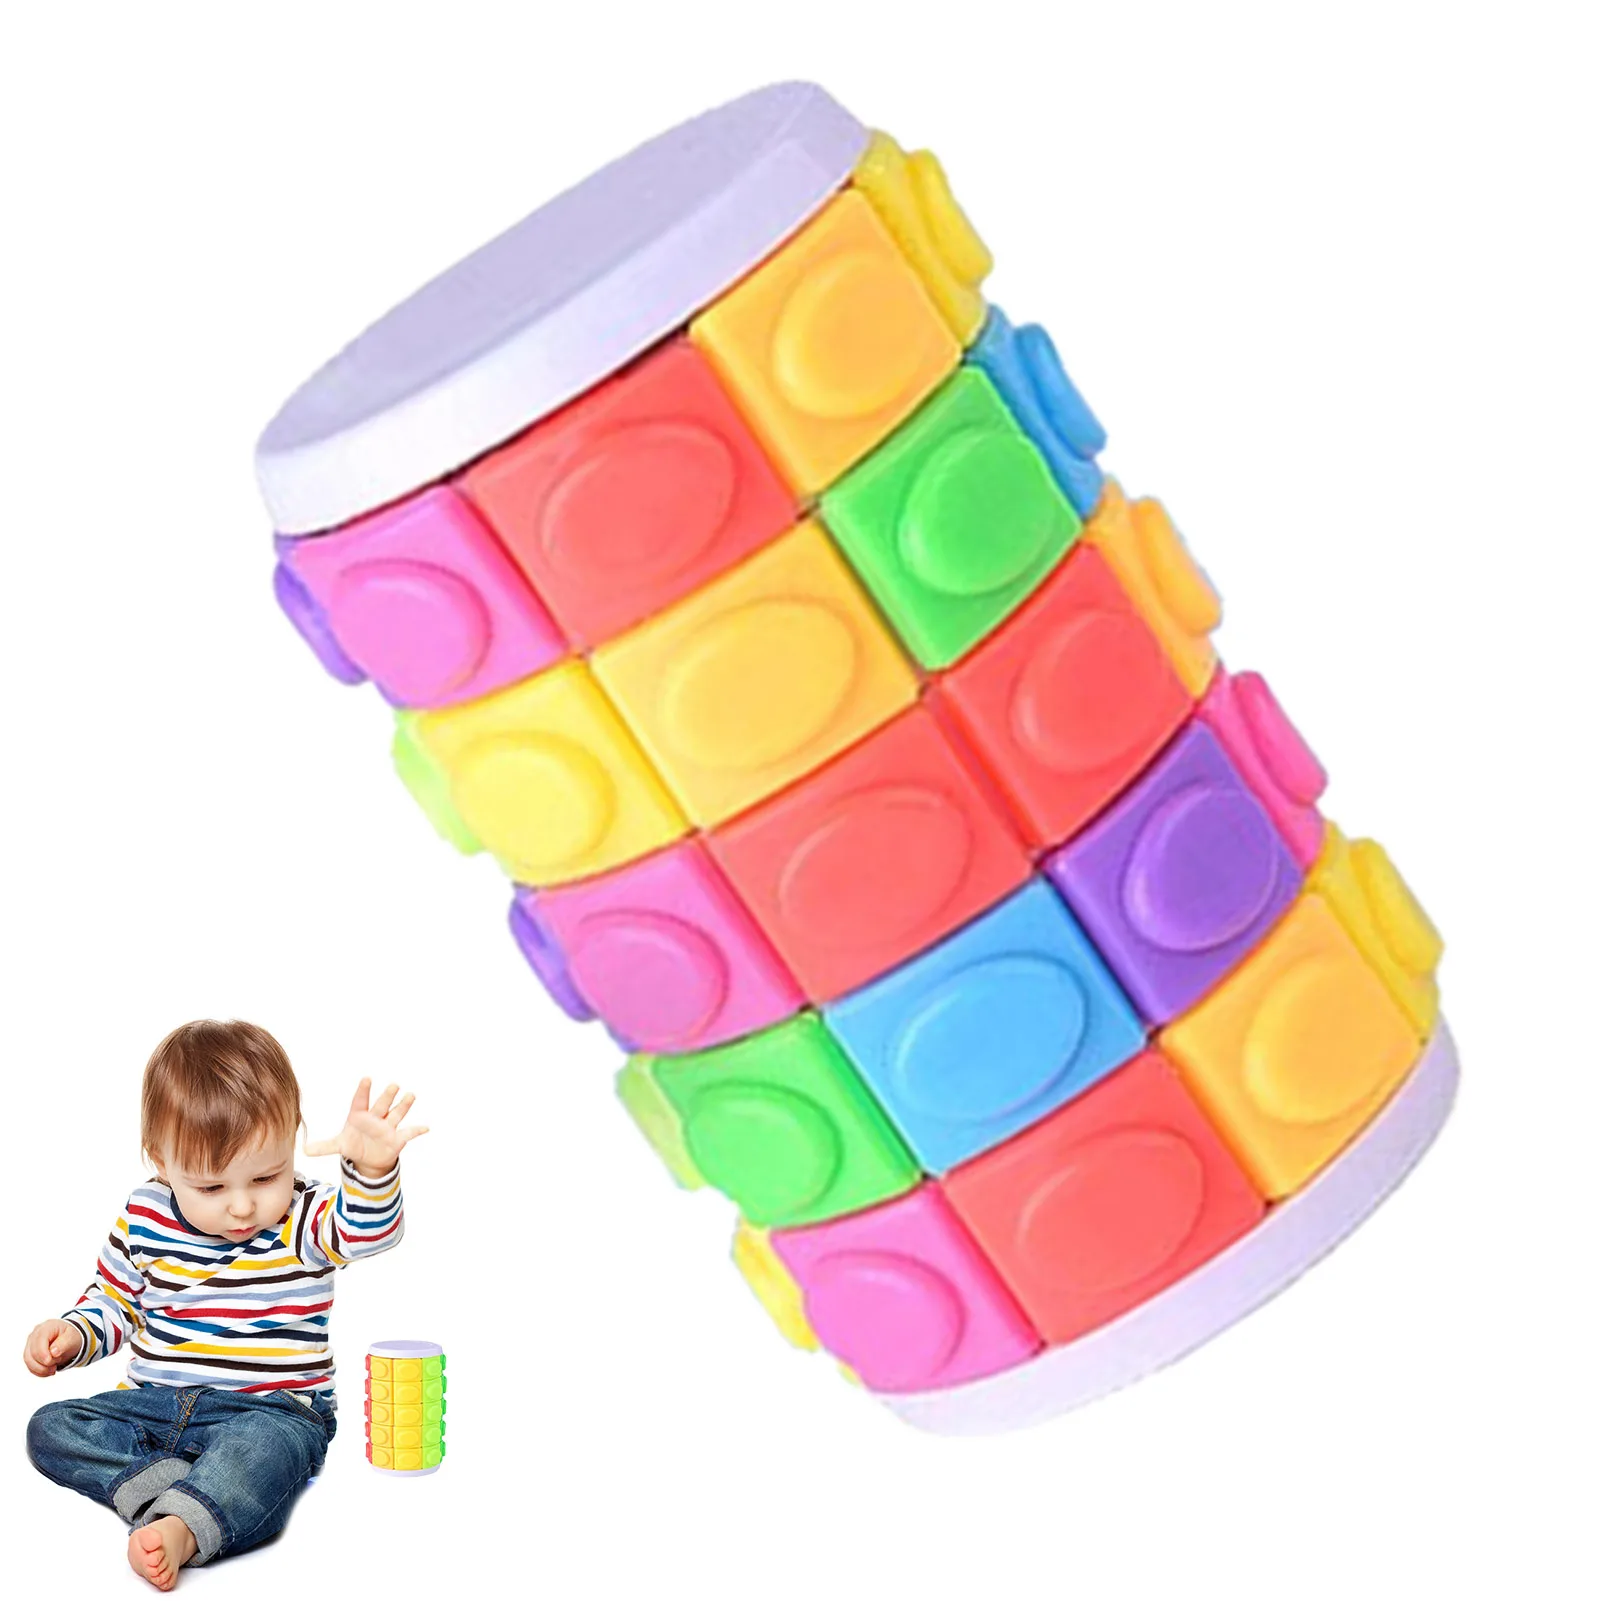 

Magic Cube Stress Reliever Three-dimensional Toys Tower Cube Intellectual Toys Speed Cubes Puzzle Toys